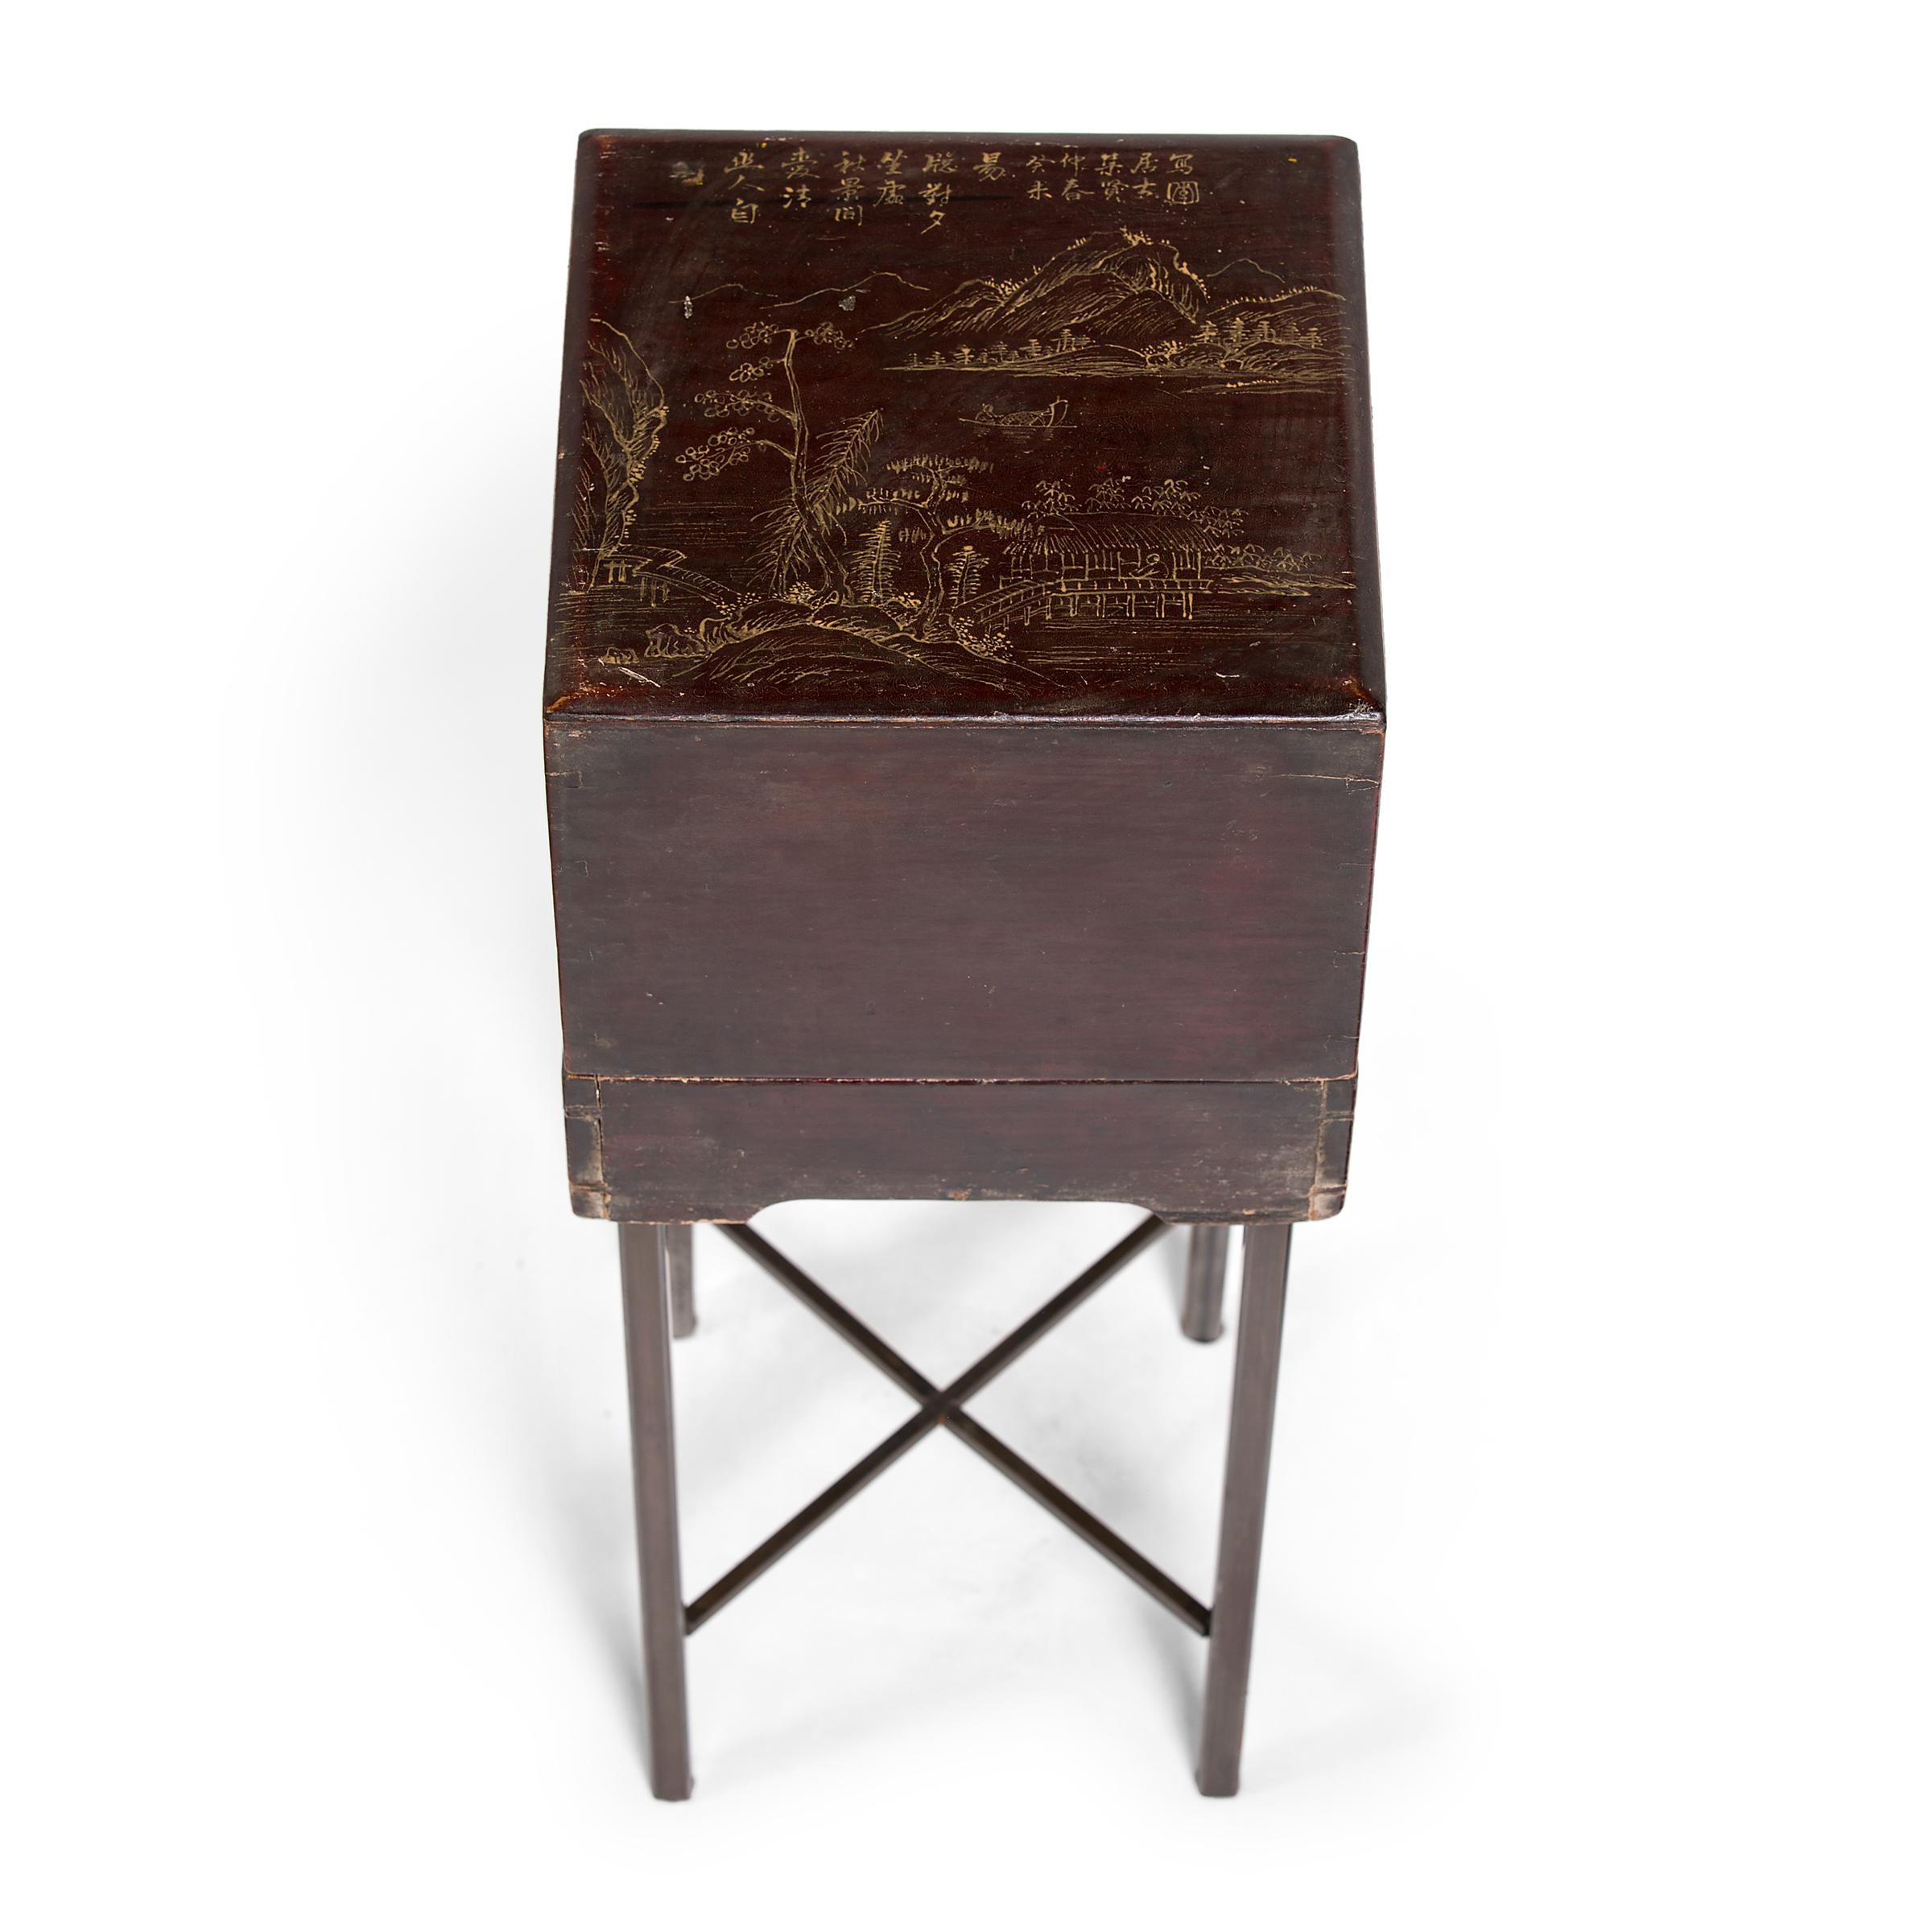 This 19th-century square box was once used by a Qing-dynasty official to elegantly store his calligraphy ink and custom seal. Previously an esteemed military officer, the official would have retired into the more contemplative occupation of a poet